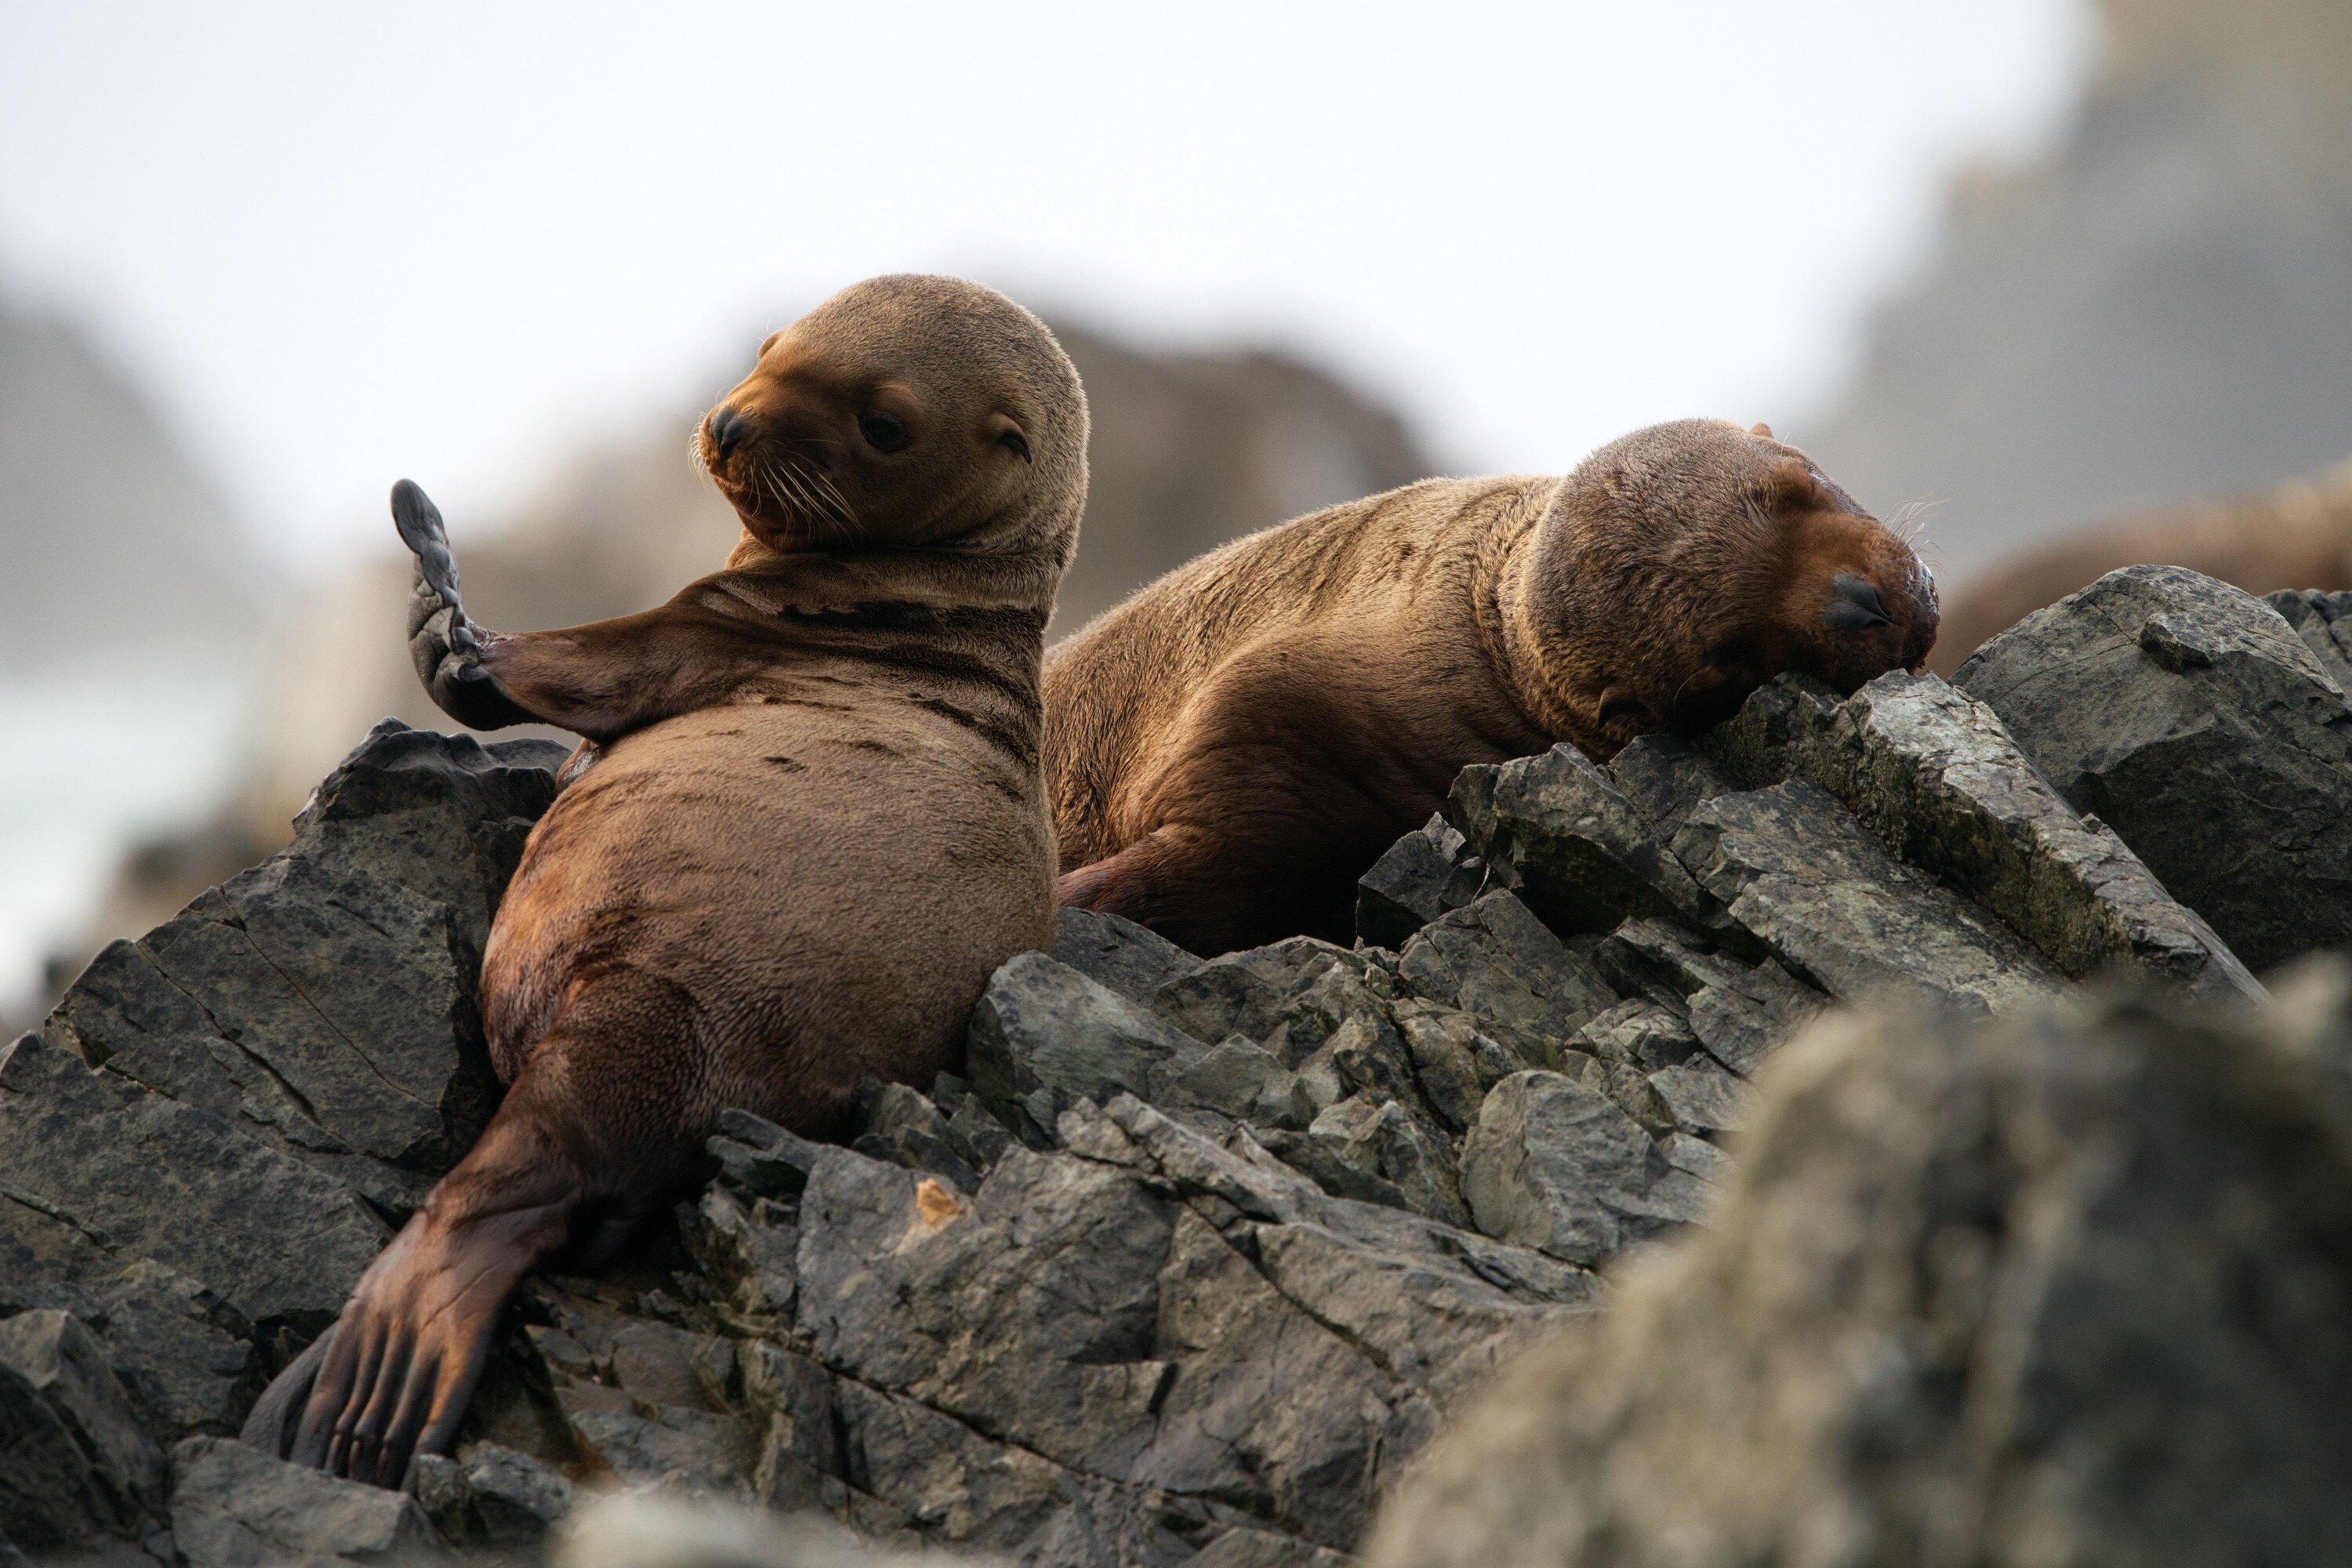 Luna looks at her flipper while another pup sleeps on the rocks. (National Geographic for Disney+/Ryan Tidman)